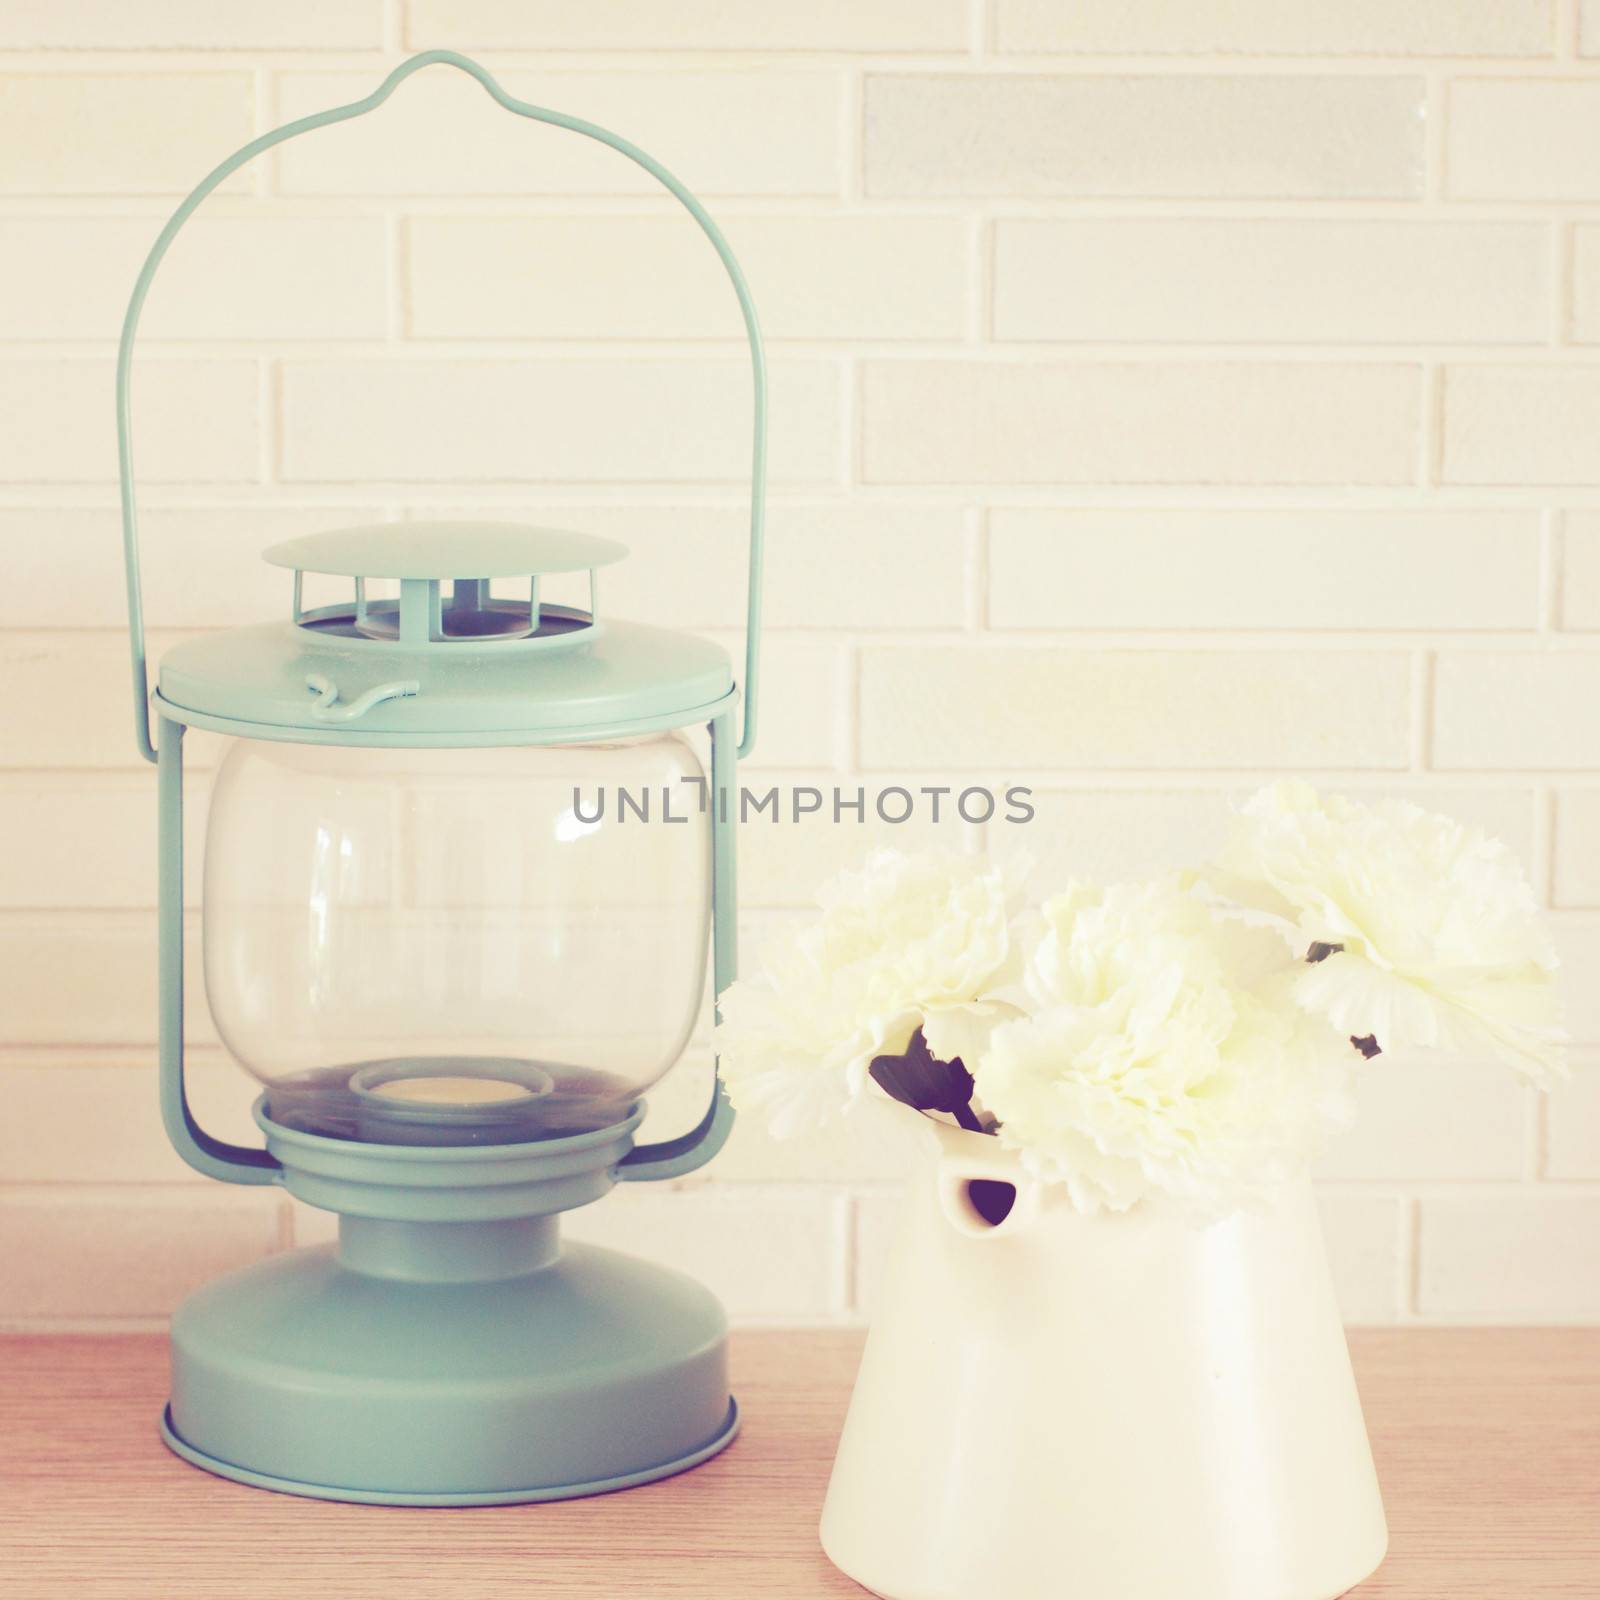 Vintage lamp and flower with retro filter effect